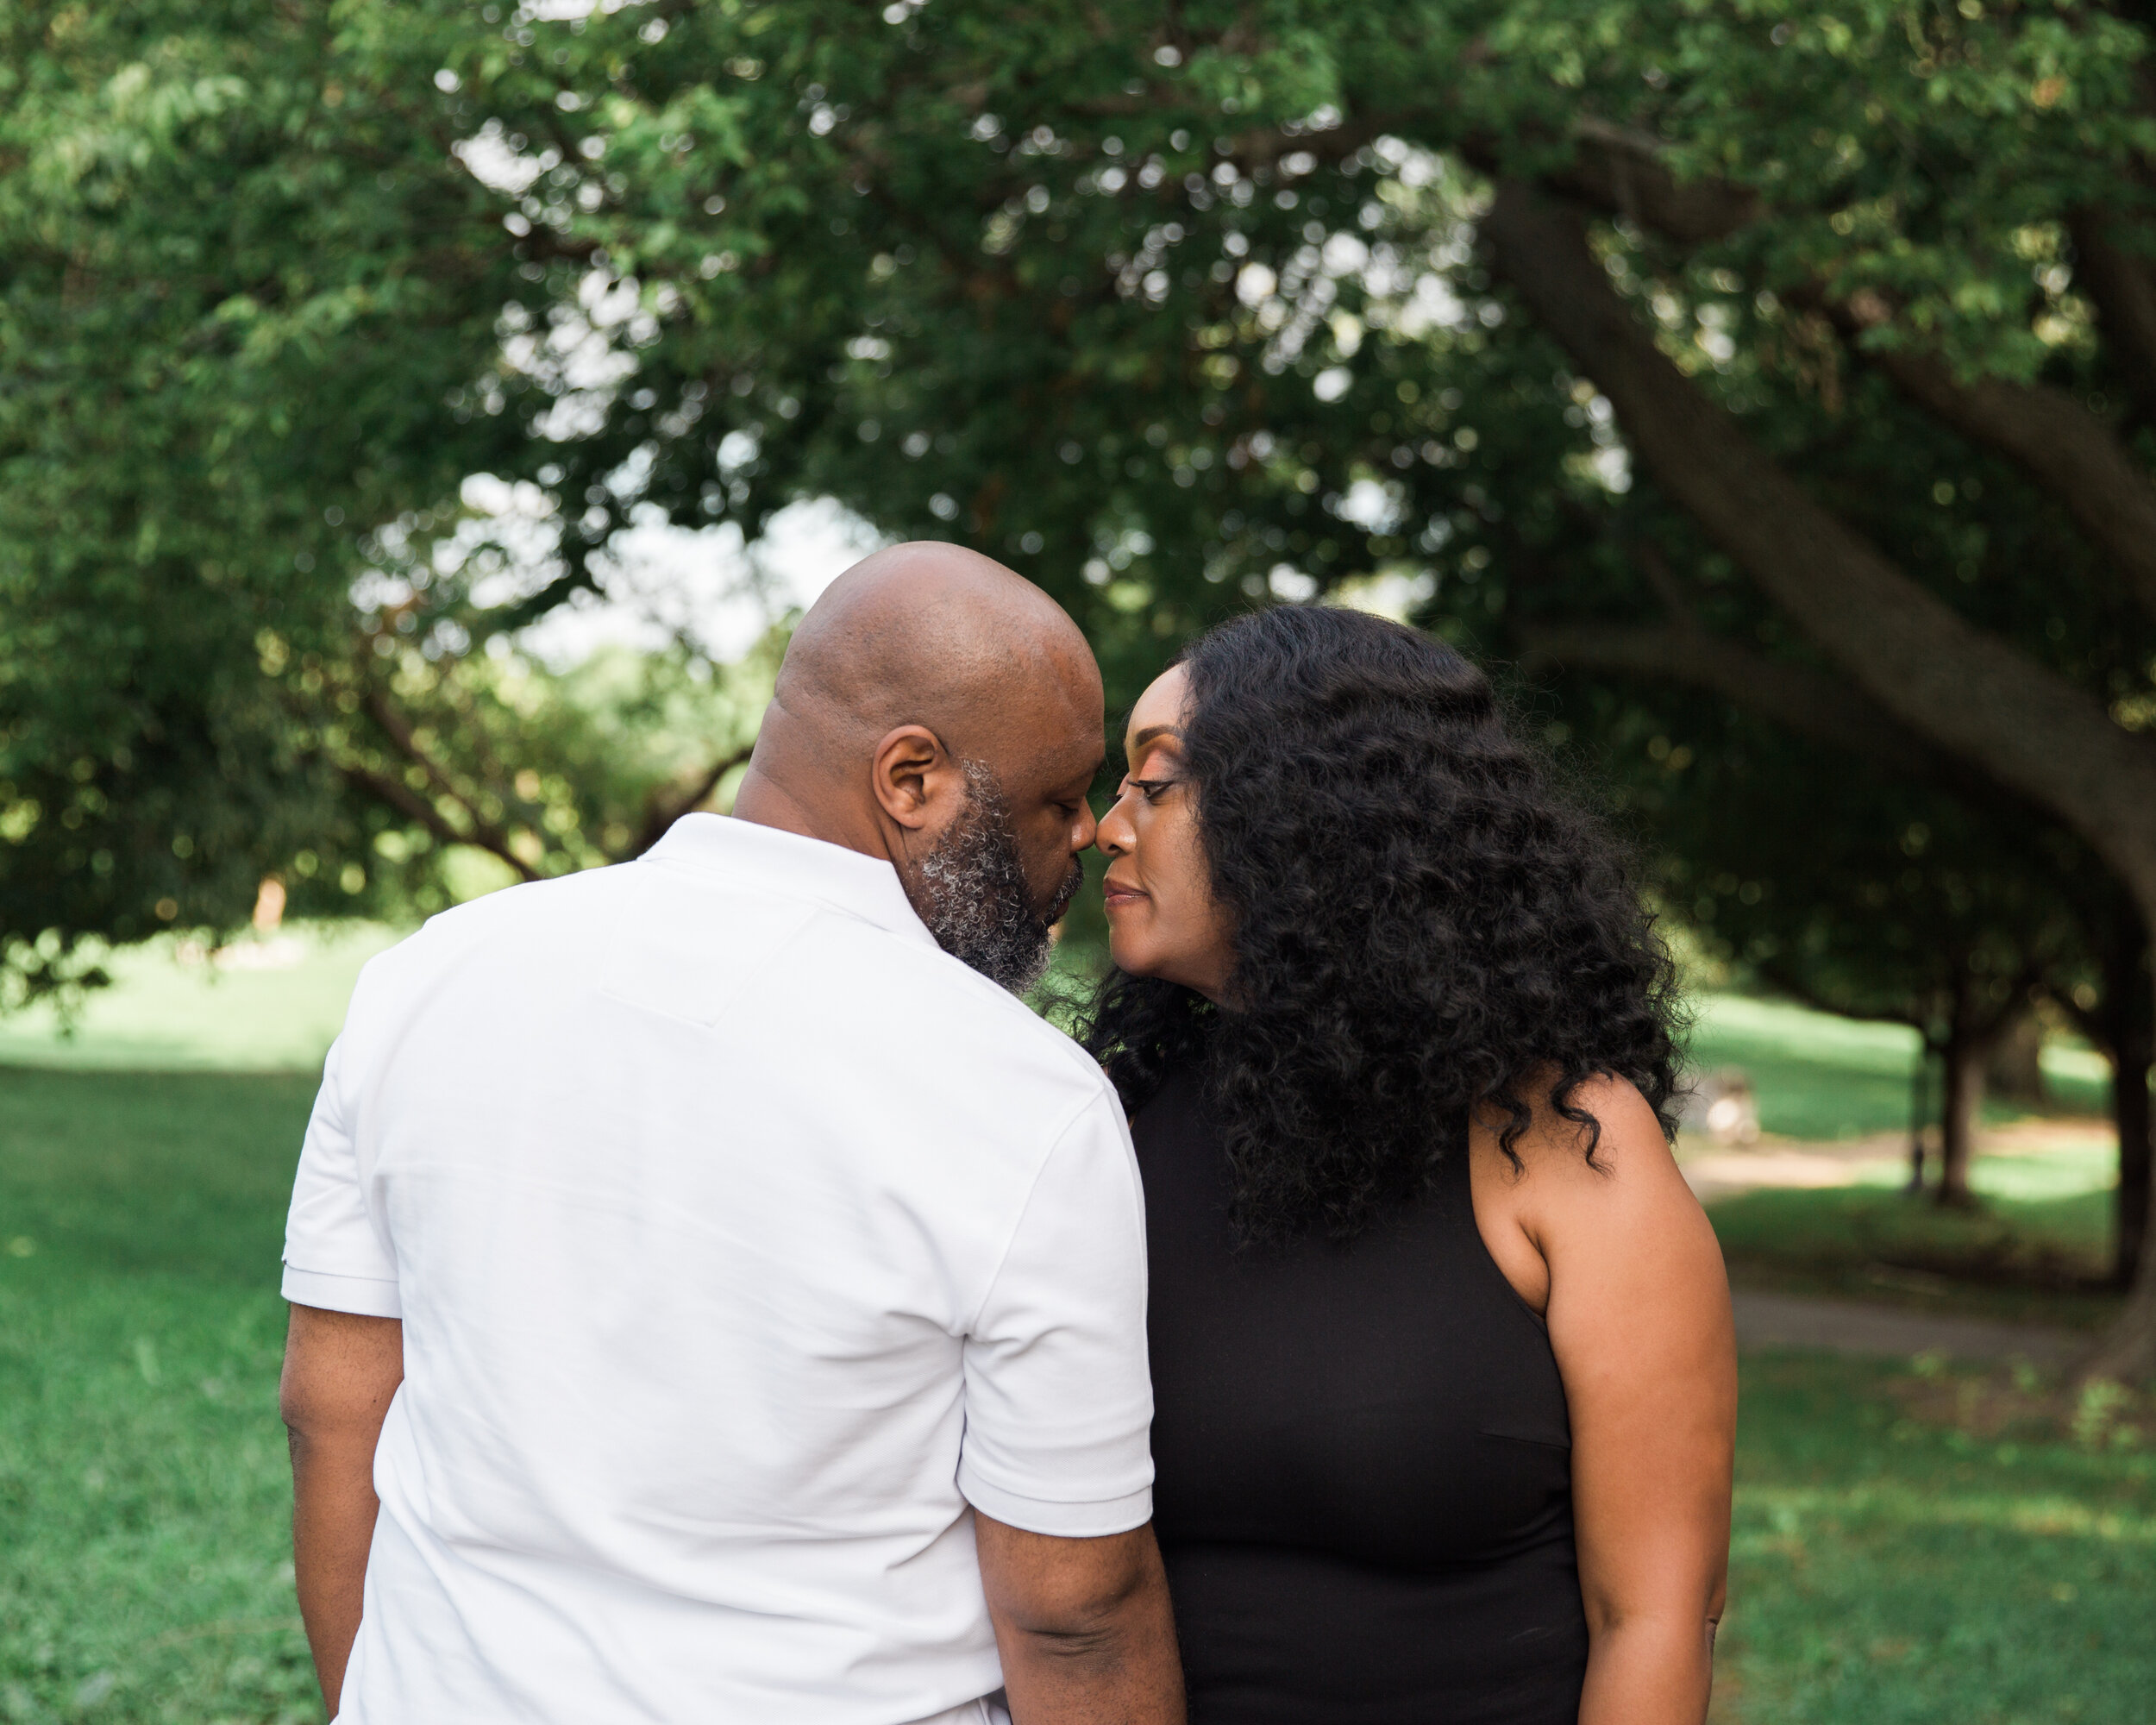 Patterson Park Engagement Session with Black Photographers Megapixels media in Baltimore Maryland (26 of 32).jpg